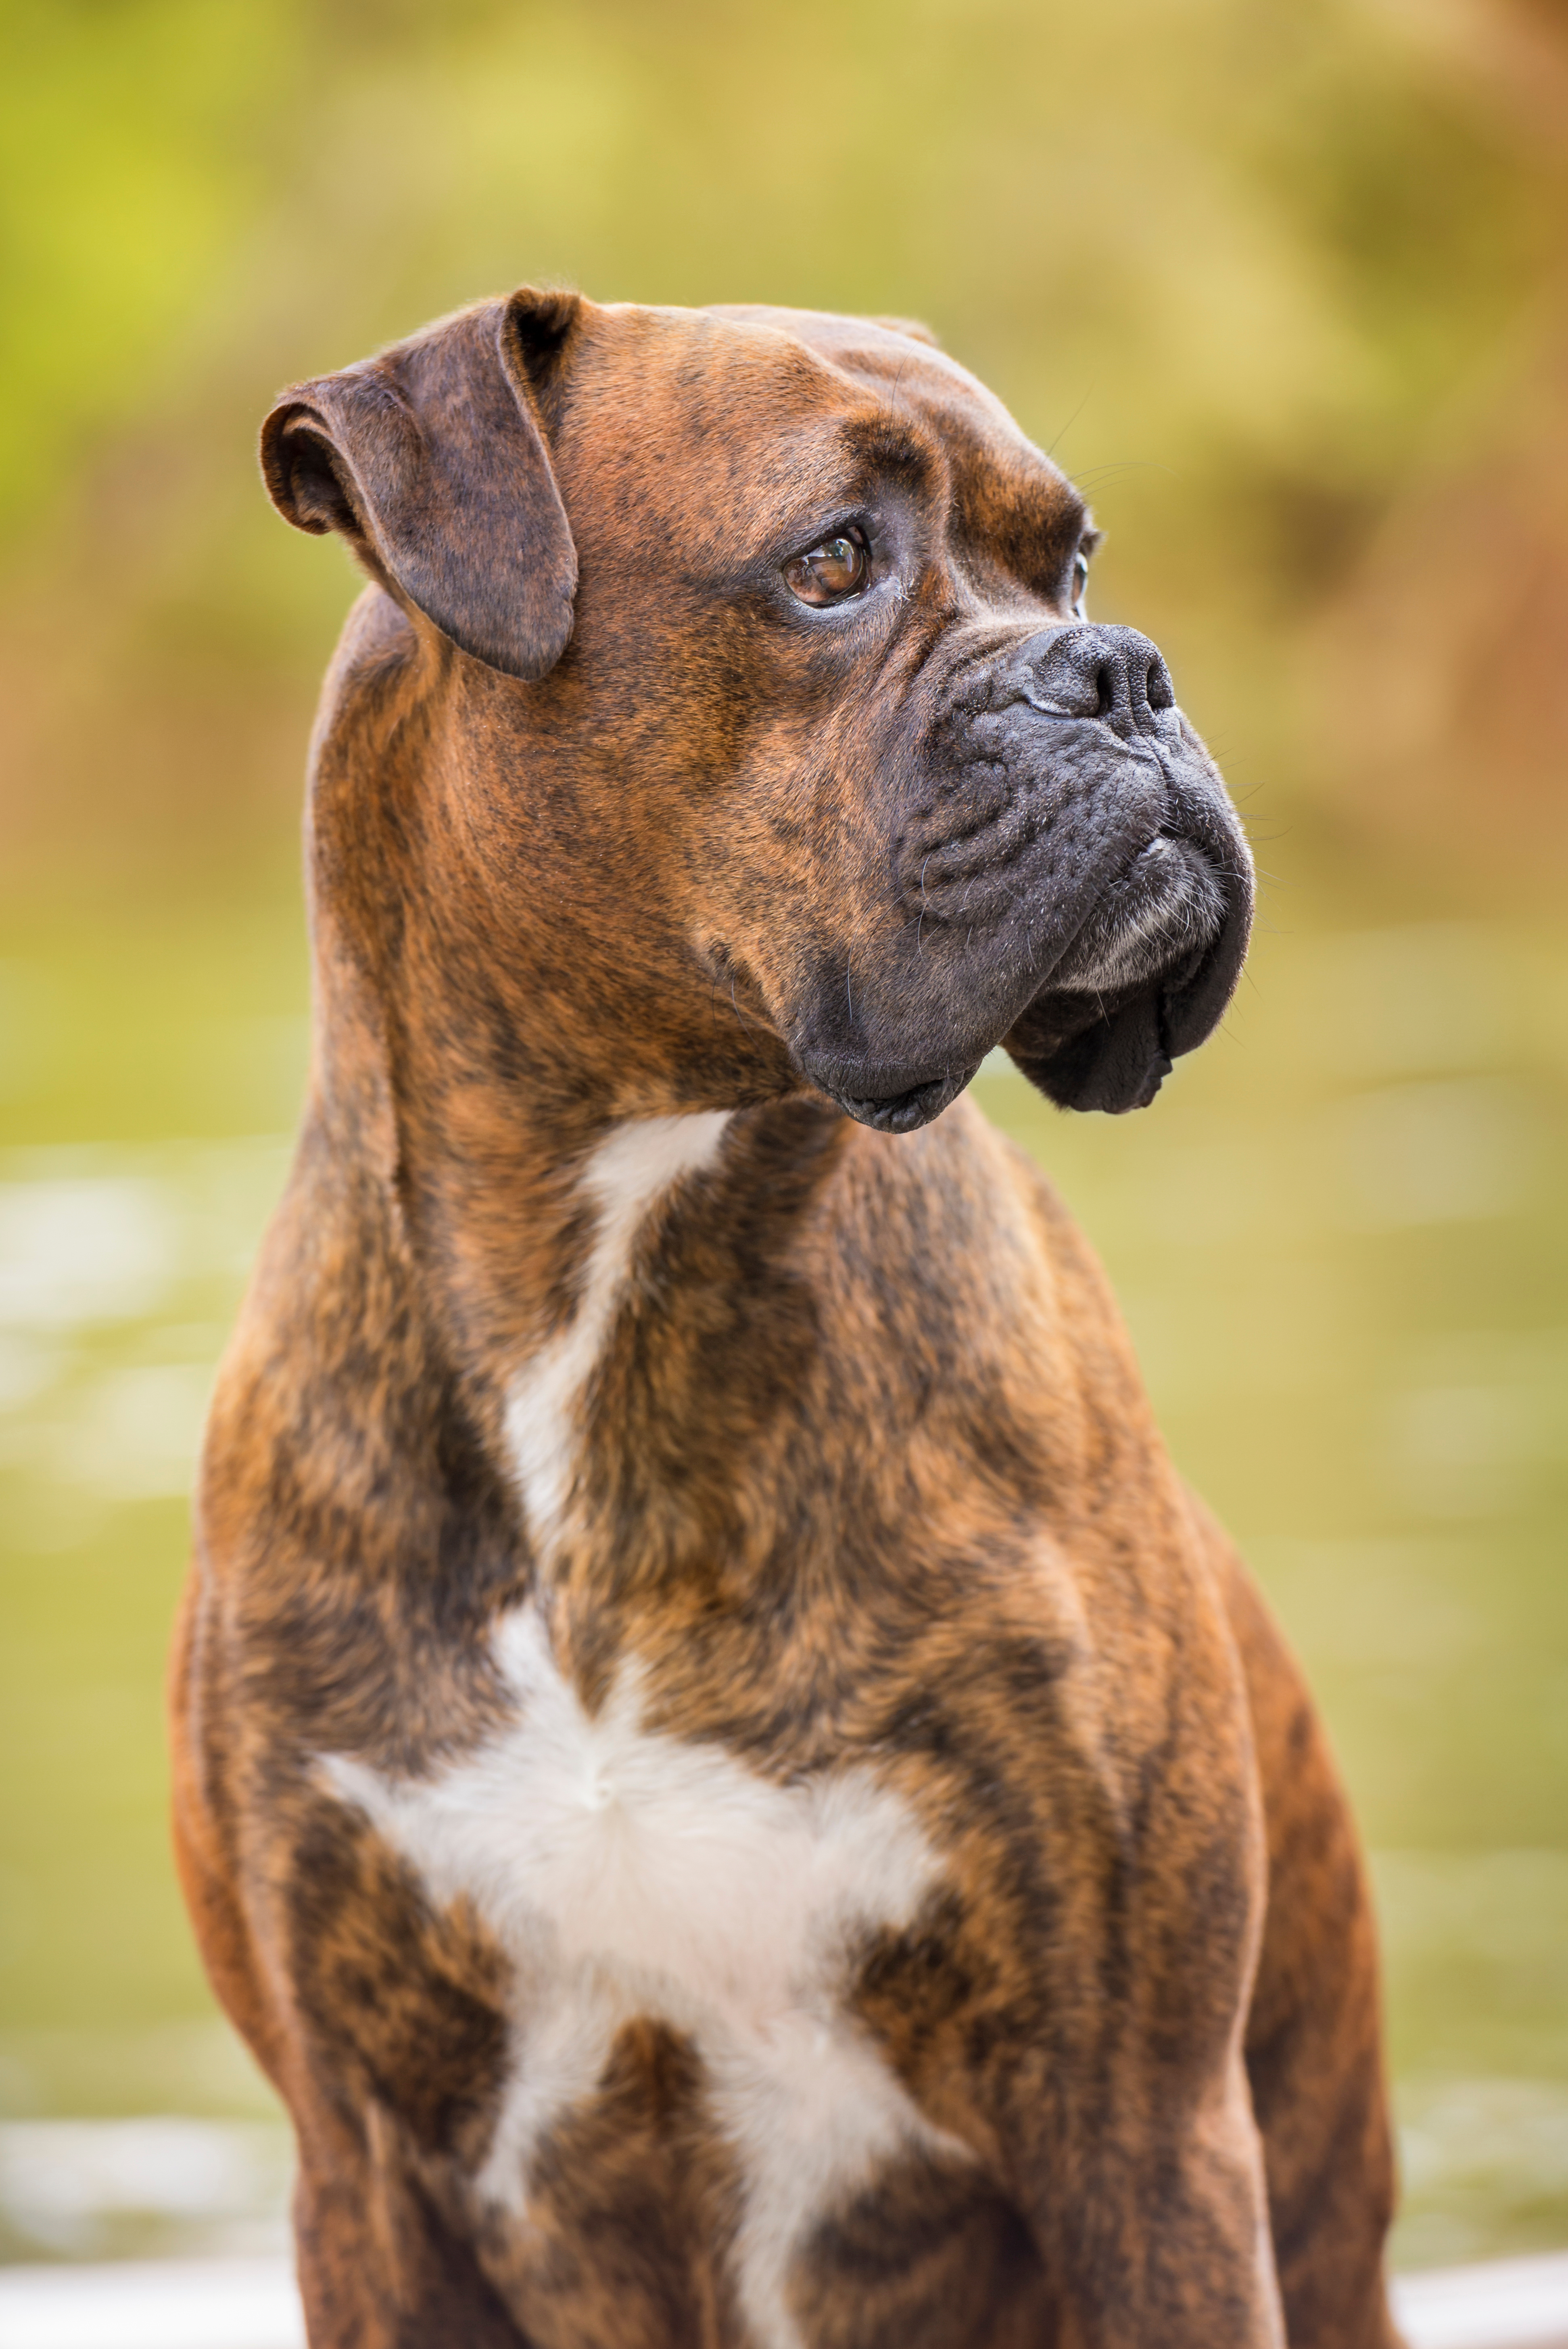 A trained boxer dog - Dog Training Elite Des Moines is the best choice for boxer dog training in Des Moines, IA!